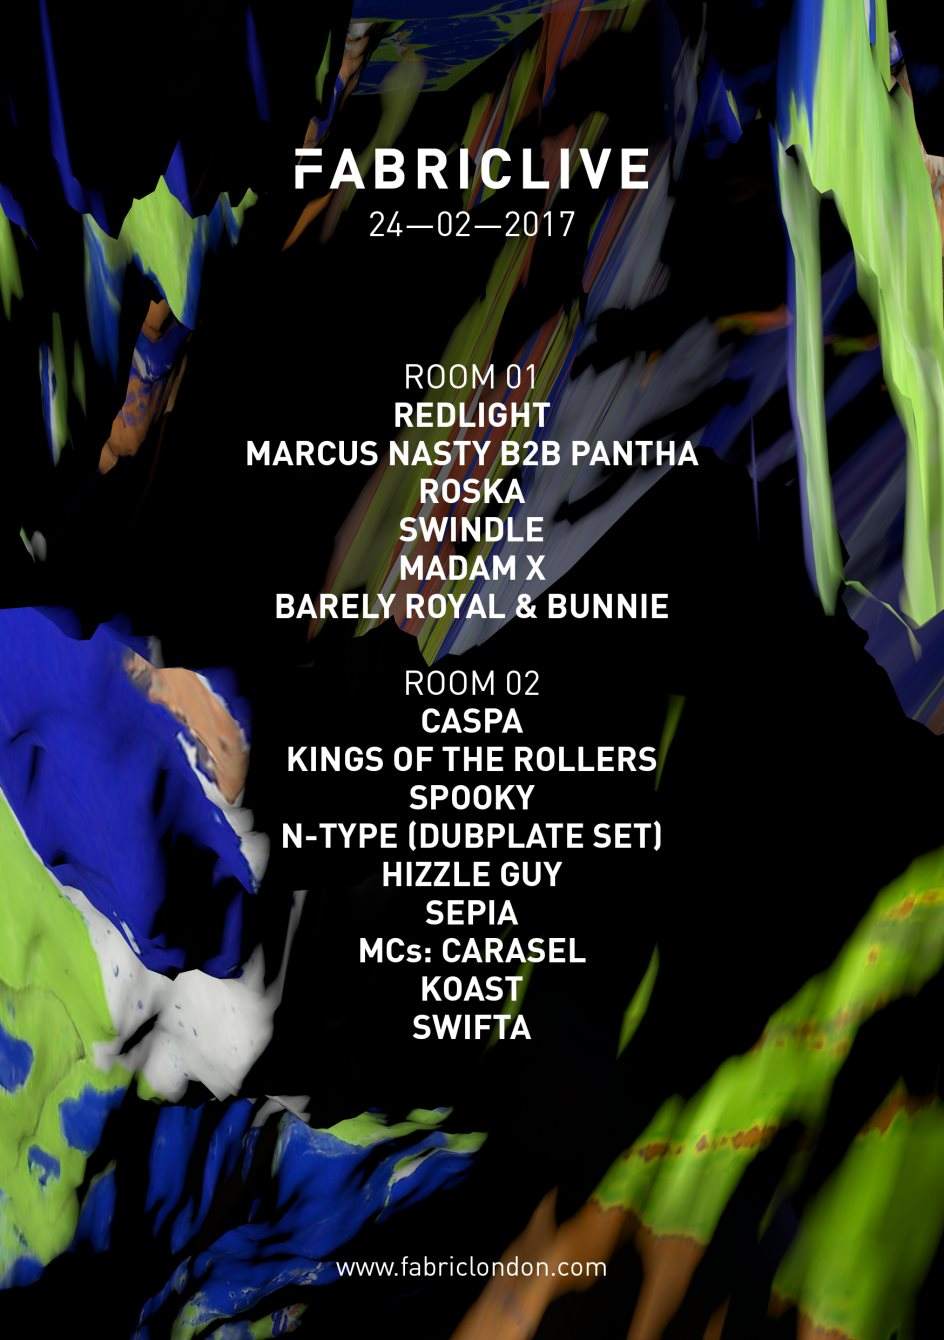 Fabriclive: Redlight, Caspa & Kings of the Rollers - Página frontal